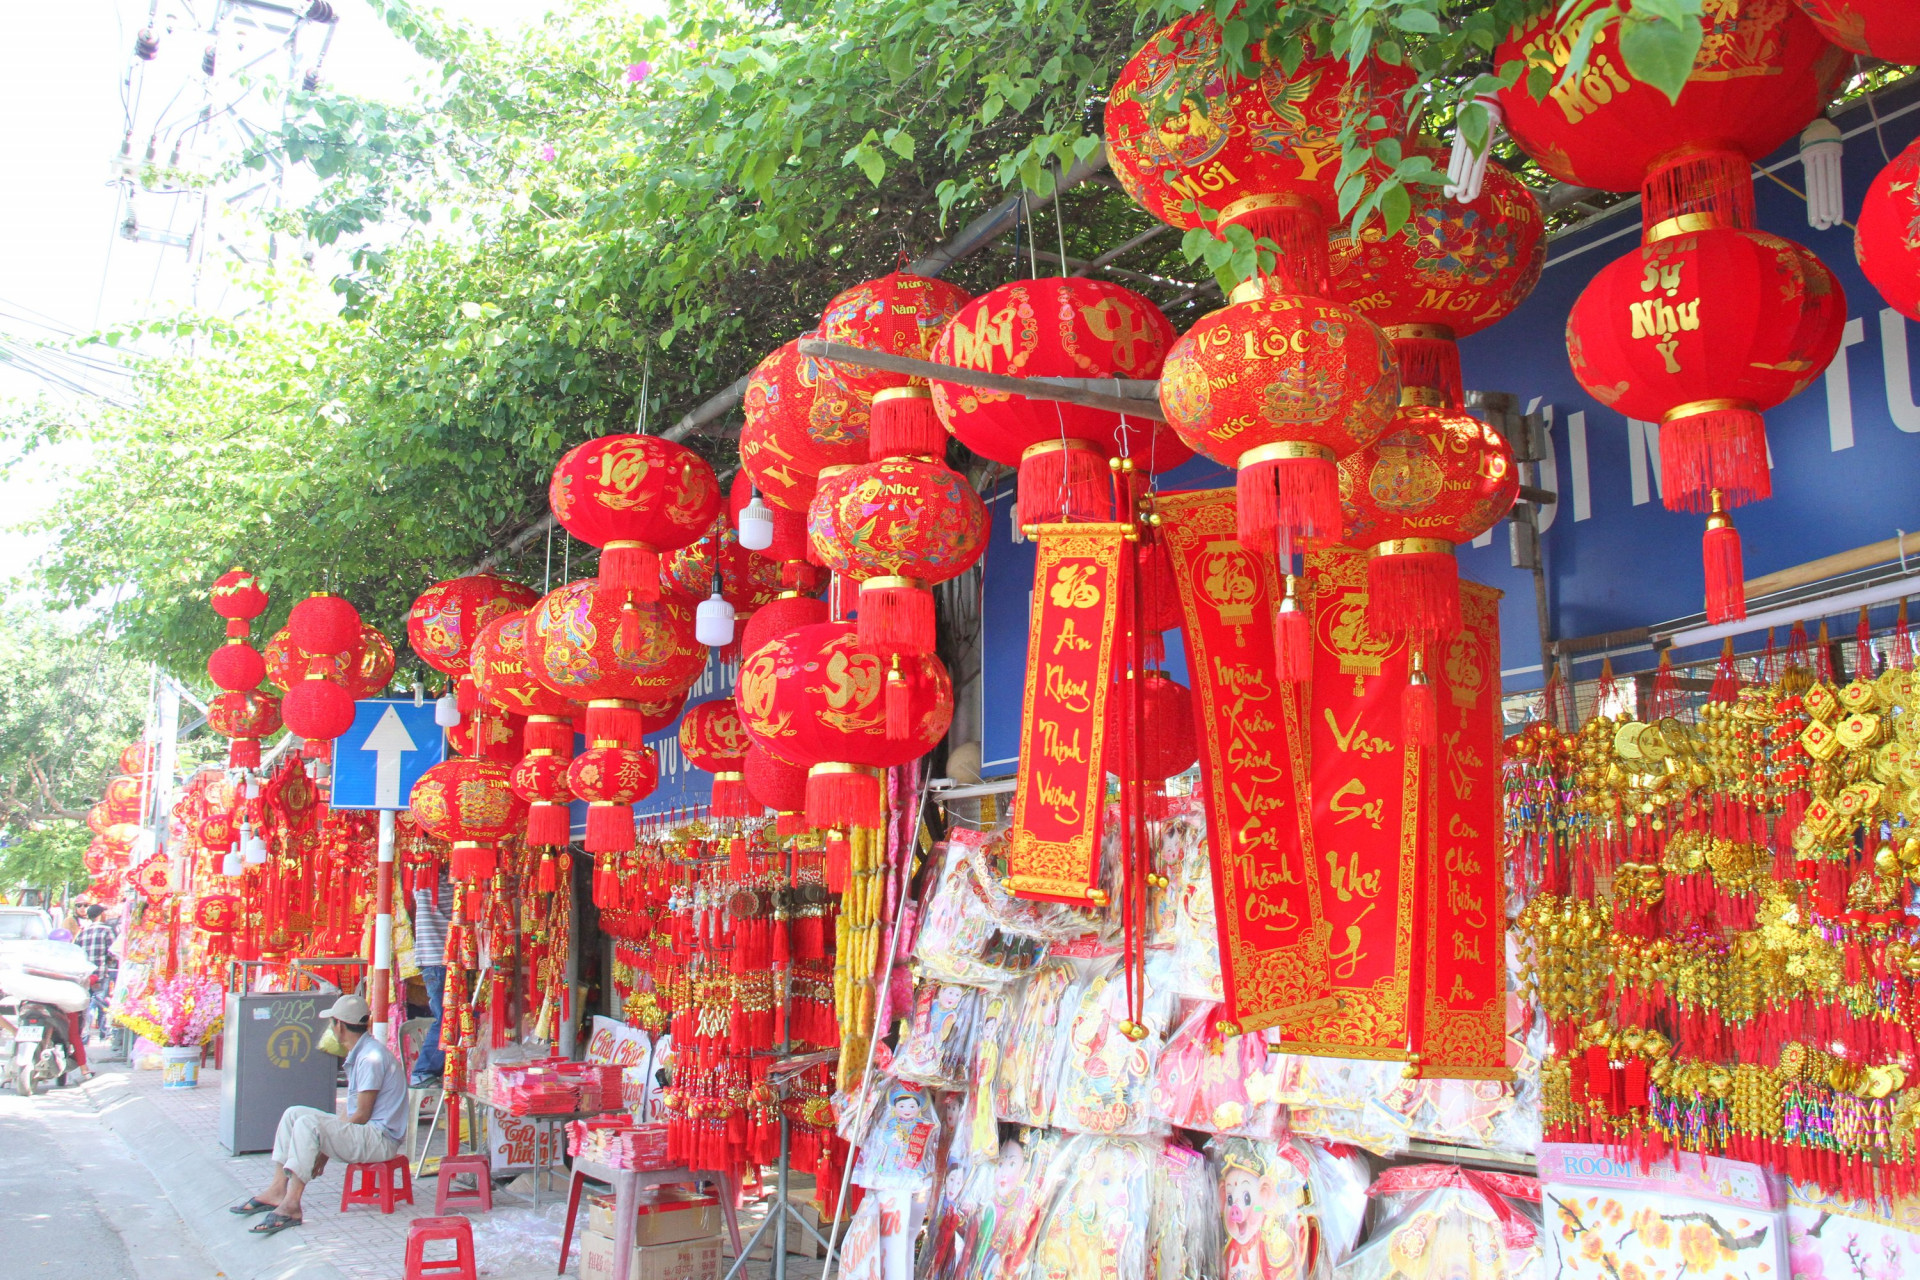 Street is more colorful with red lanterns